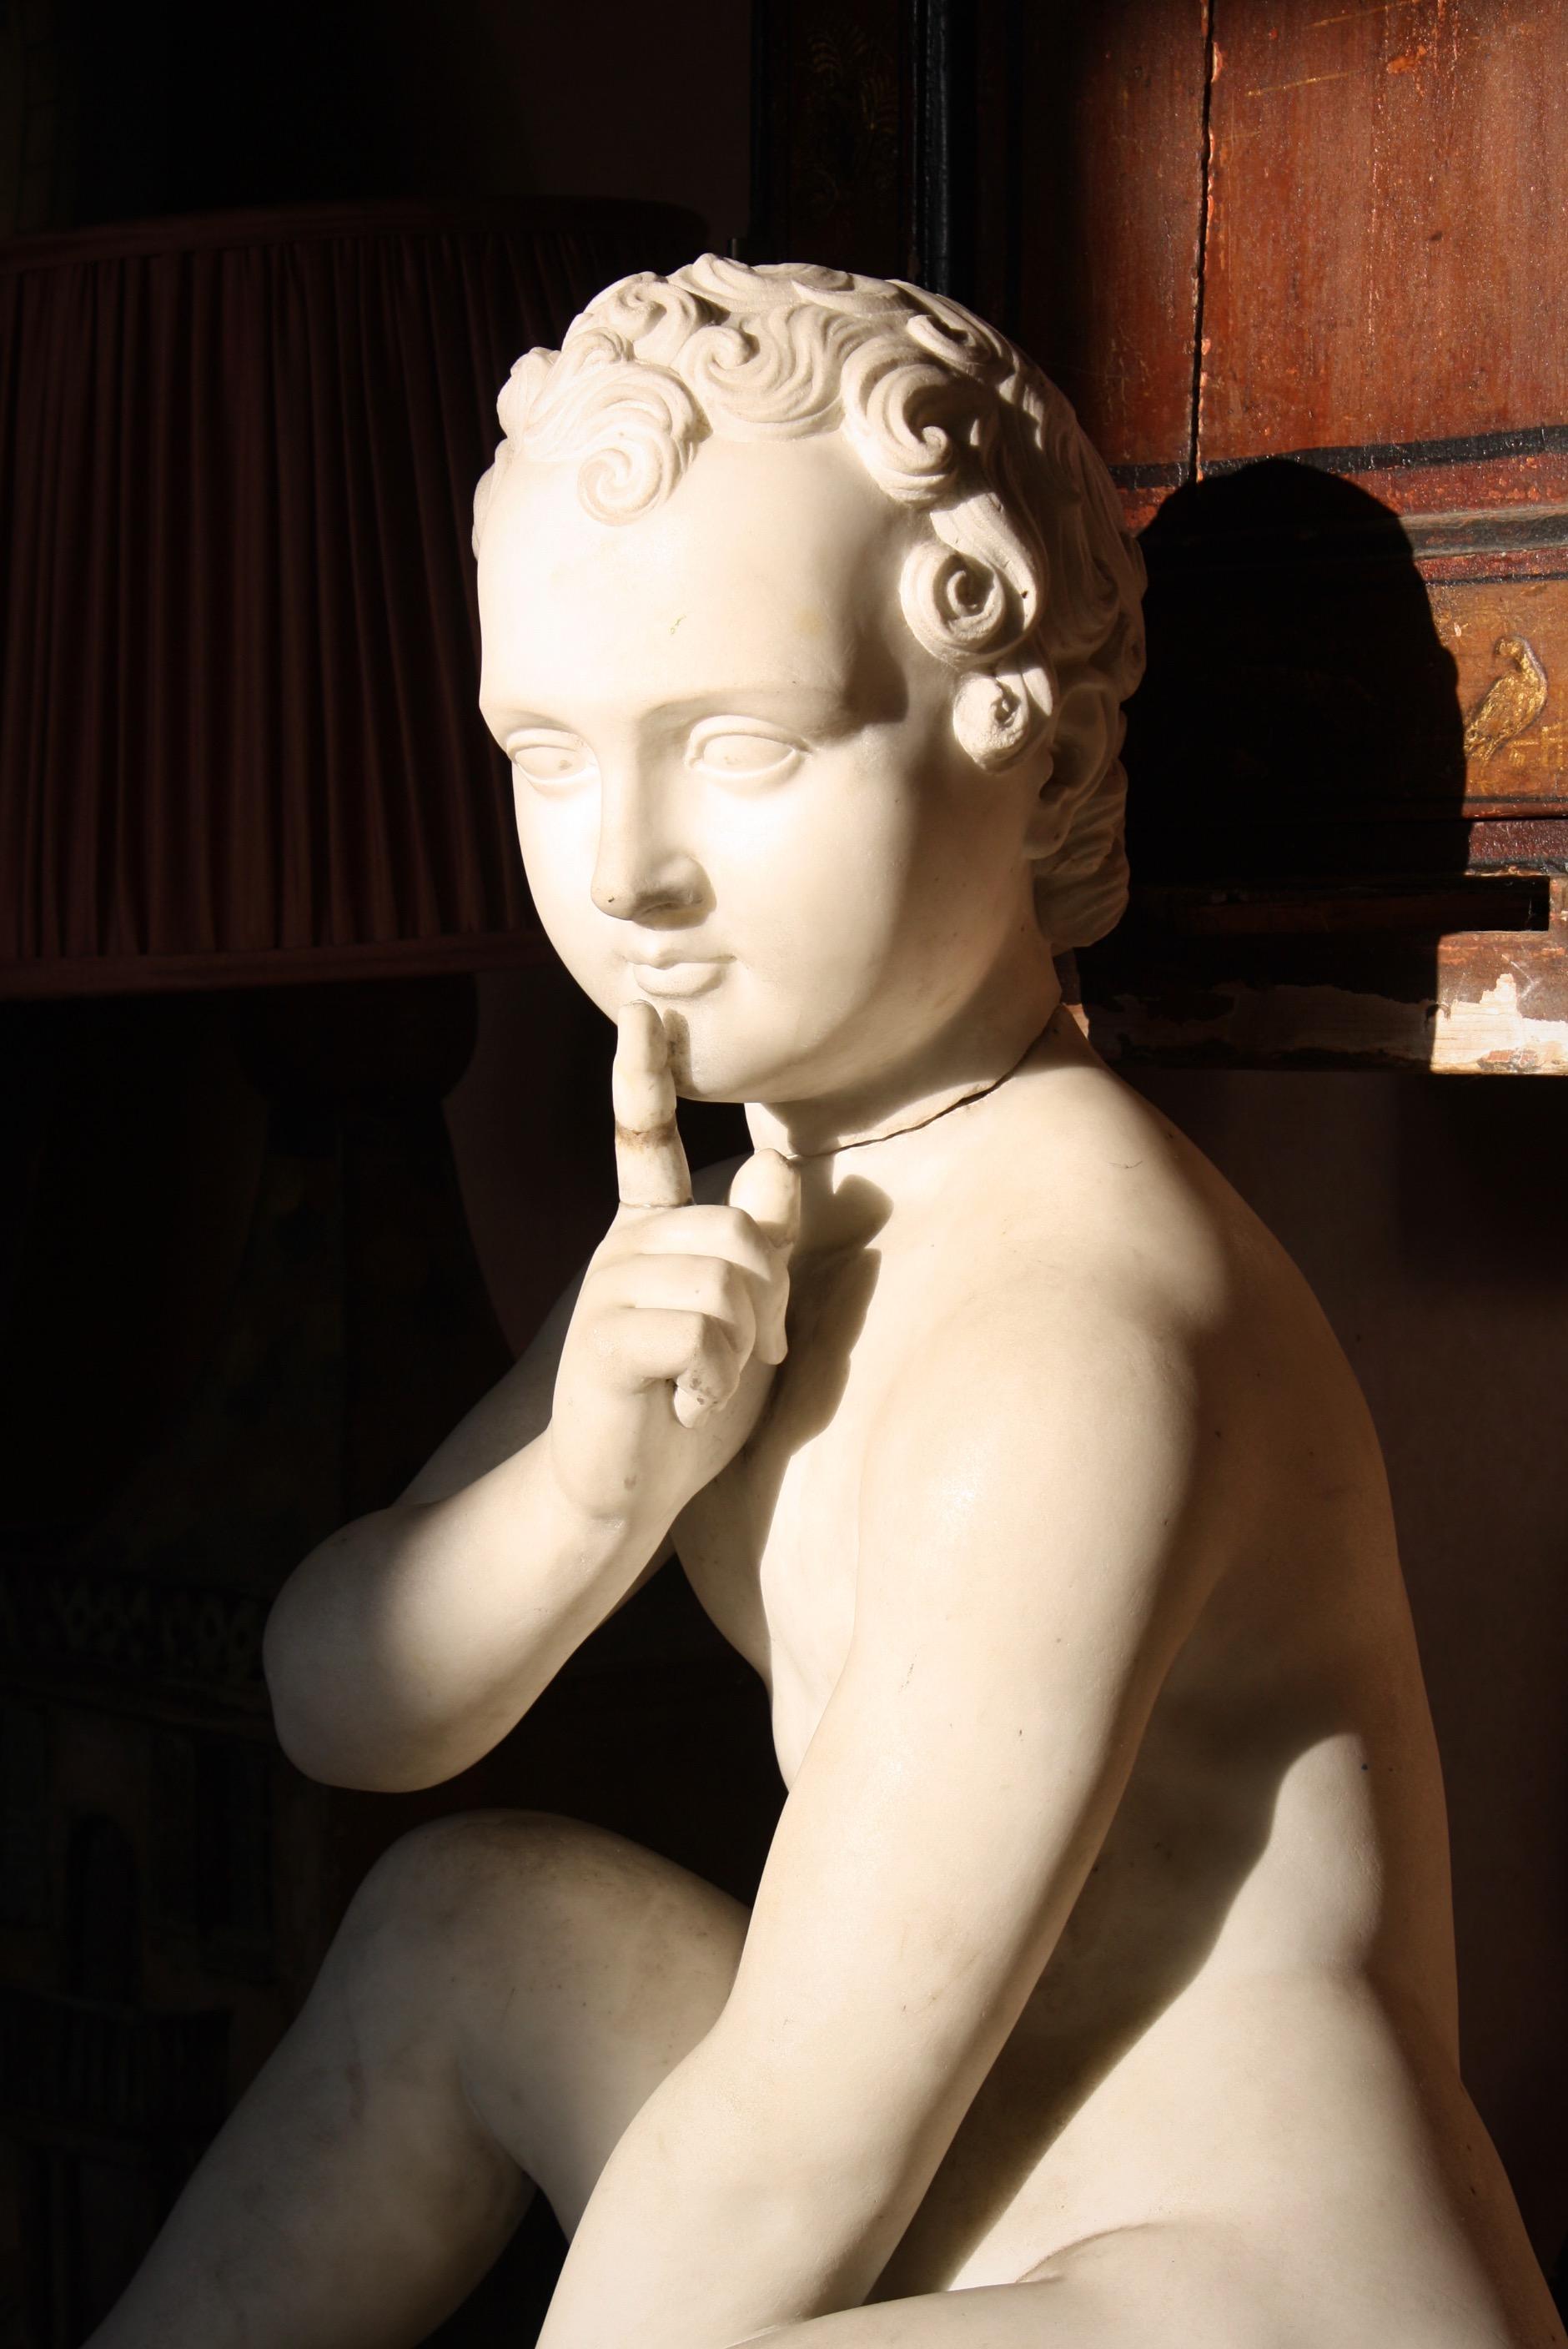 A very fine marble sculpture of Arpocrate also know as Harpocrates, the Greek god of silence. Often depicted with lotus flowers and a horn, the sculpture in question was carved by the Italian Francesco Pozzi (Italian, 1779 – 1844) around the first